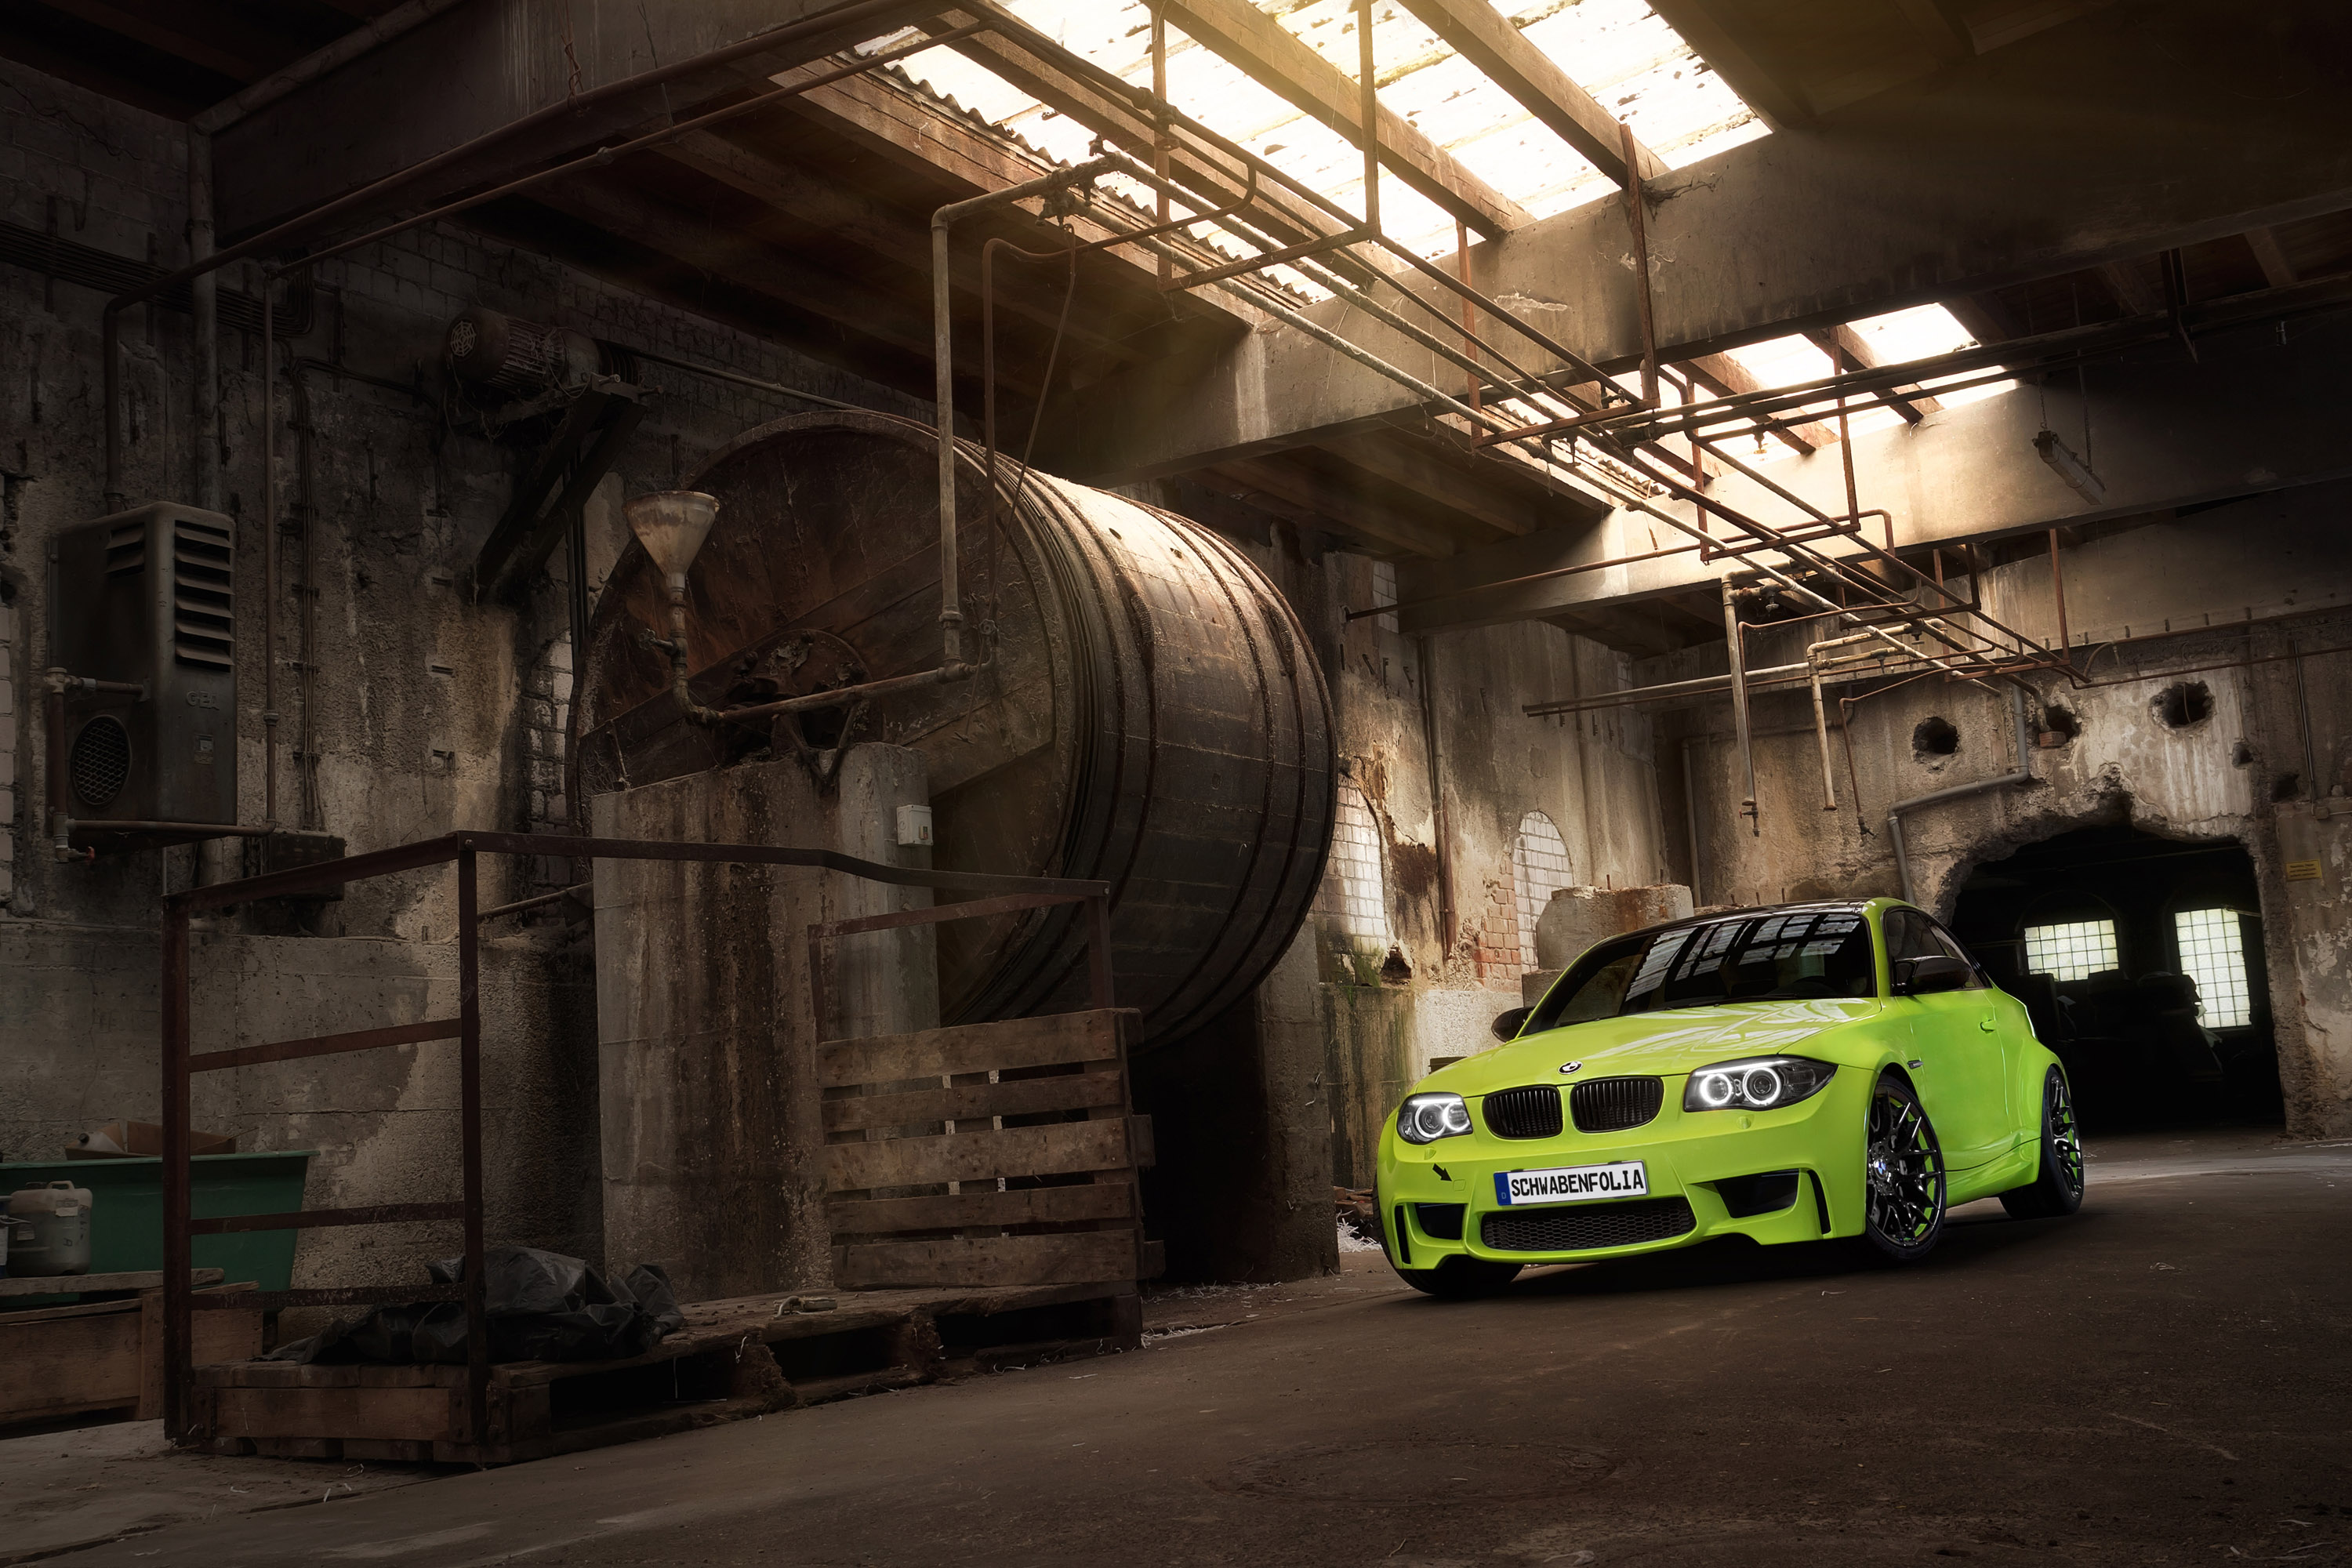 2012, Schwabenfolia, Bmw, 1m coupe, Coupe, Tuning Wallpaper